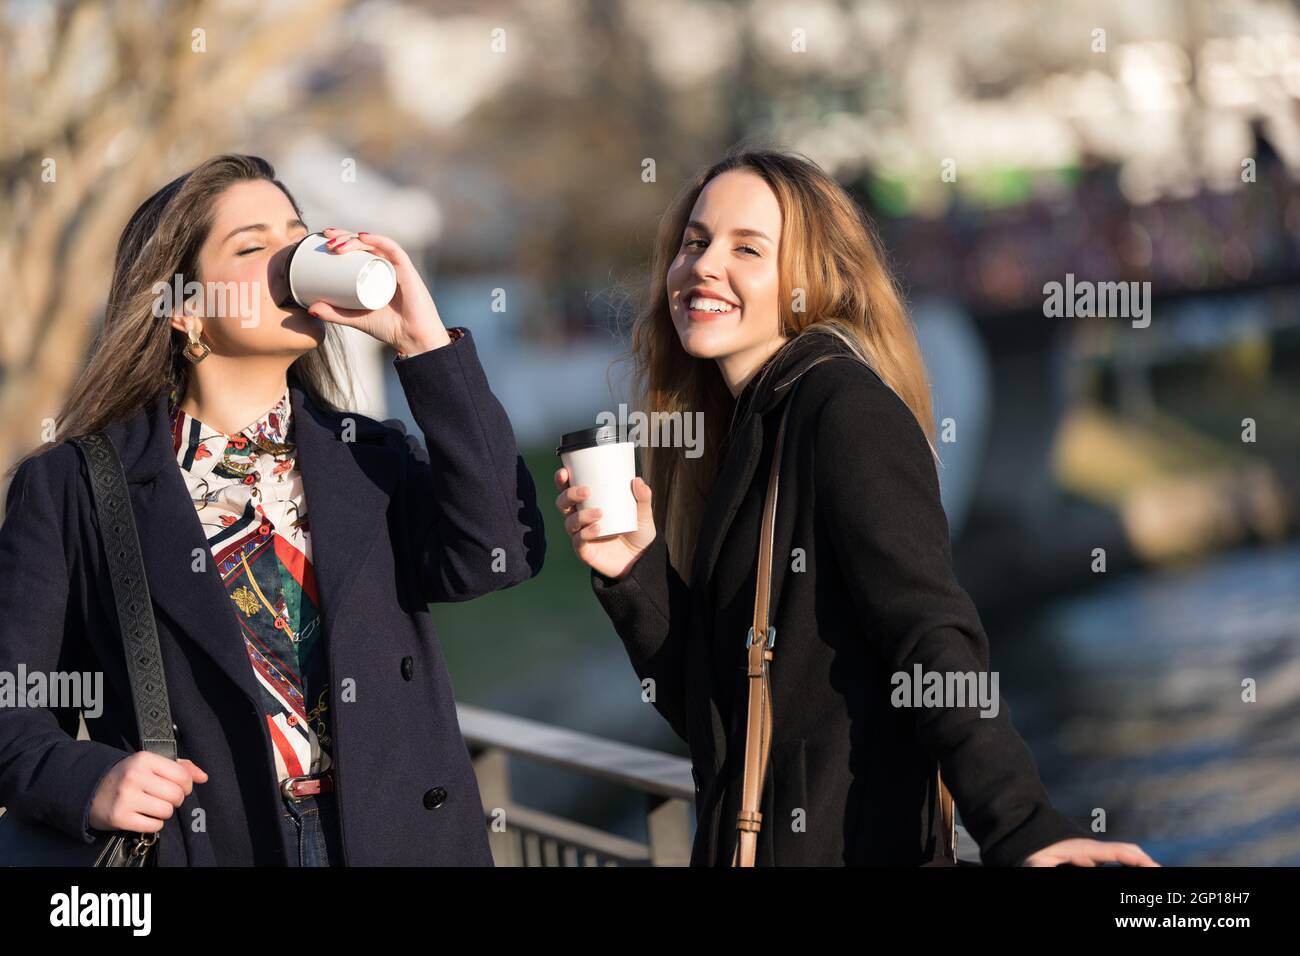 Outdoors fashion portrait of two young beautiful women friends drinking coffee. Smiling and going shopping. Kissing a cup of coffee. Bright make up Stock Photo